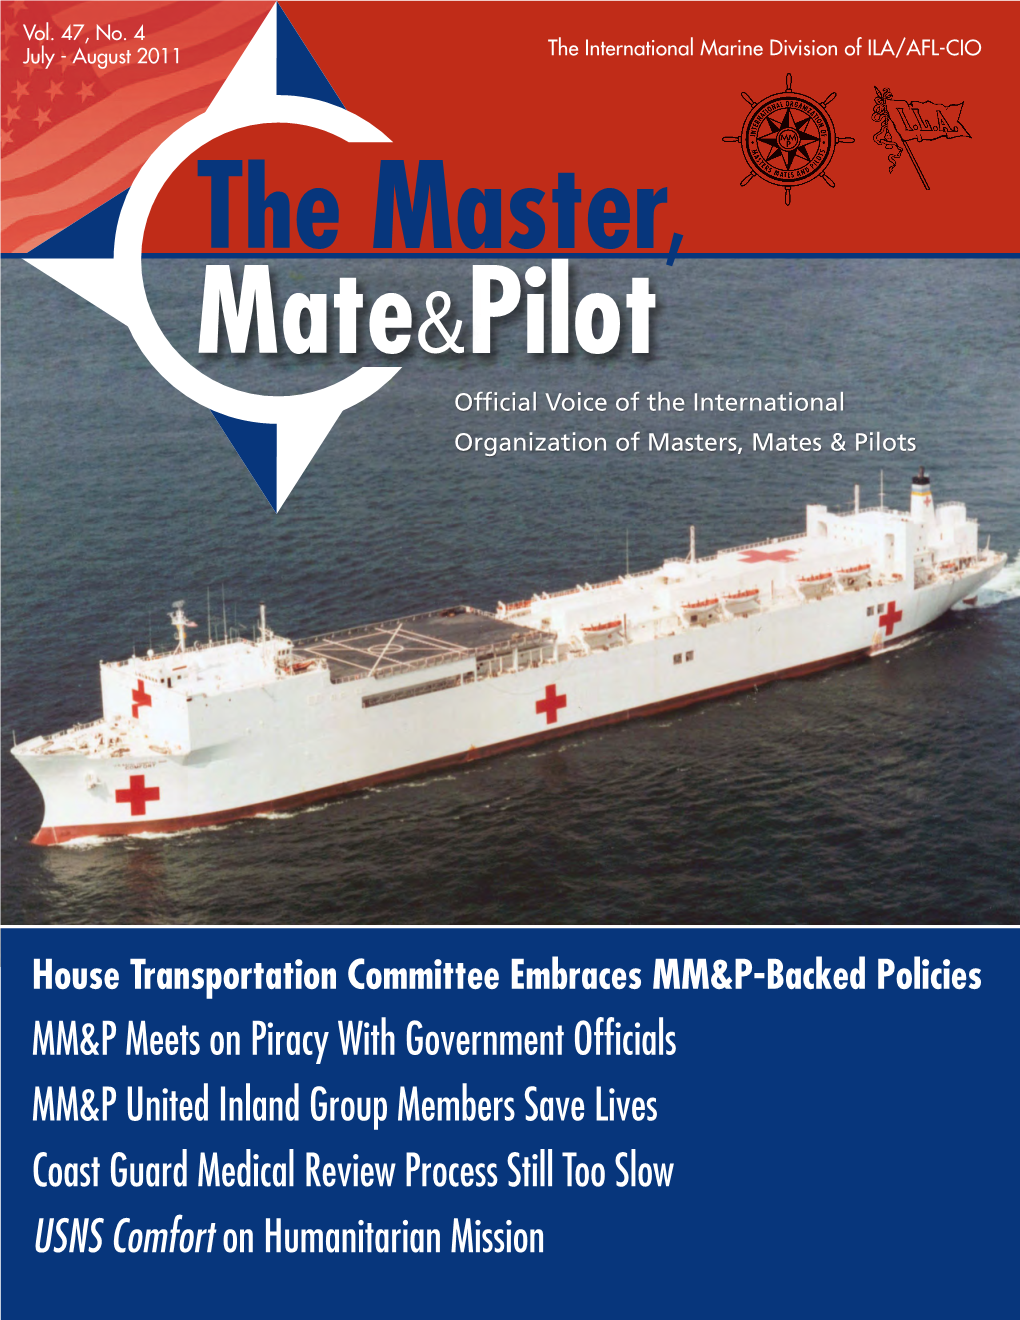 House Transportation Committee Embraces MM&P-Backed Policies